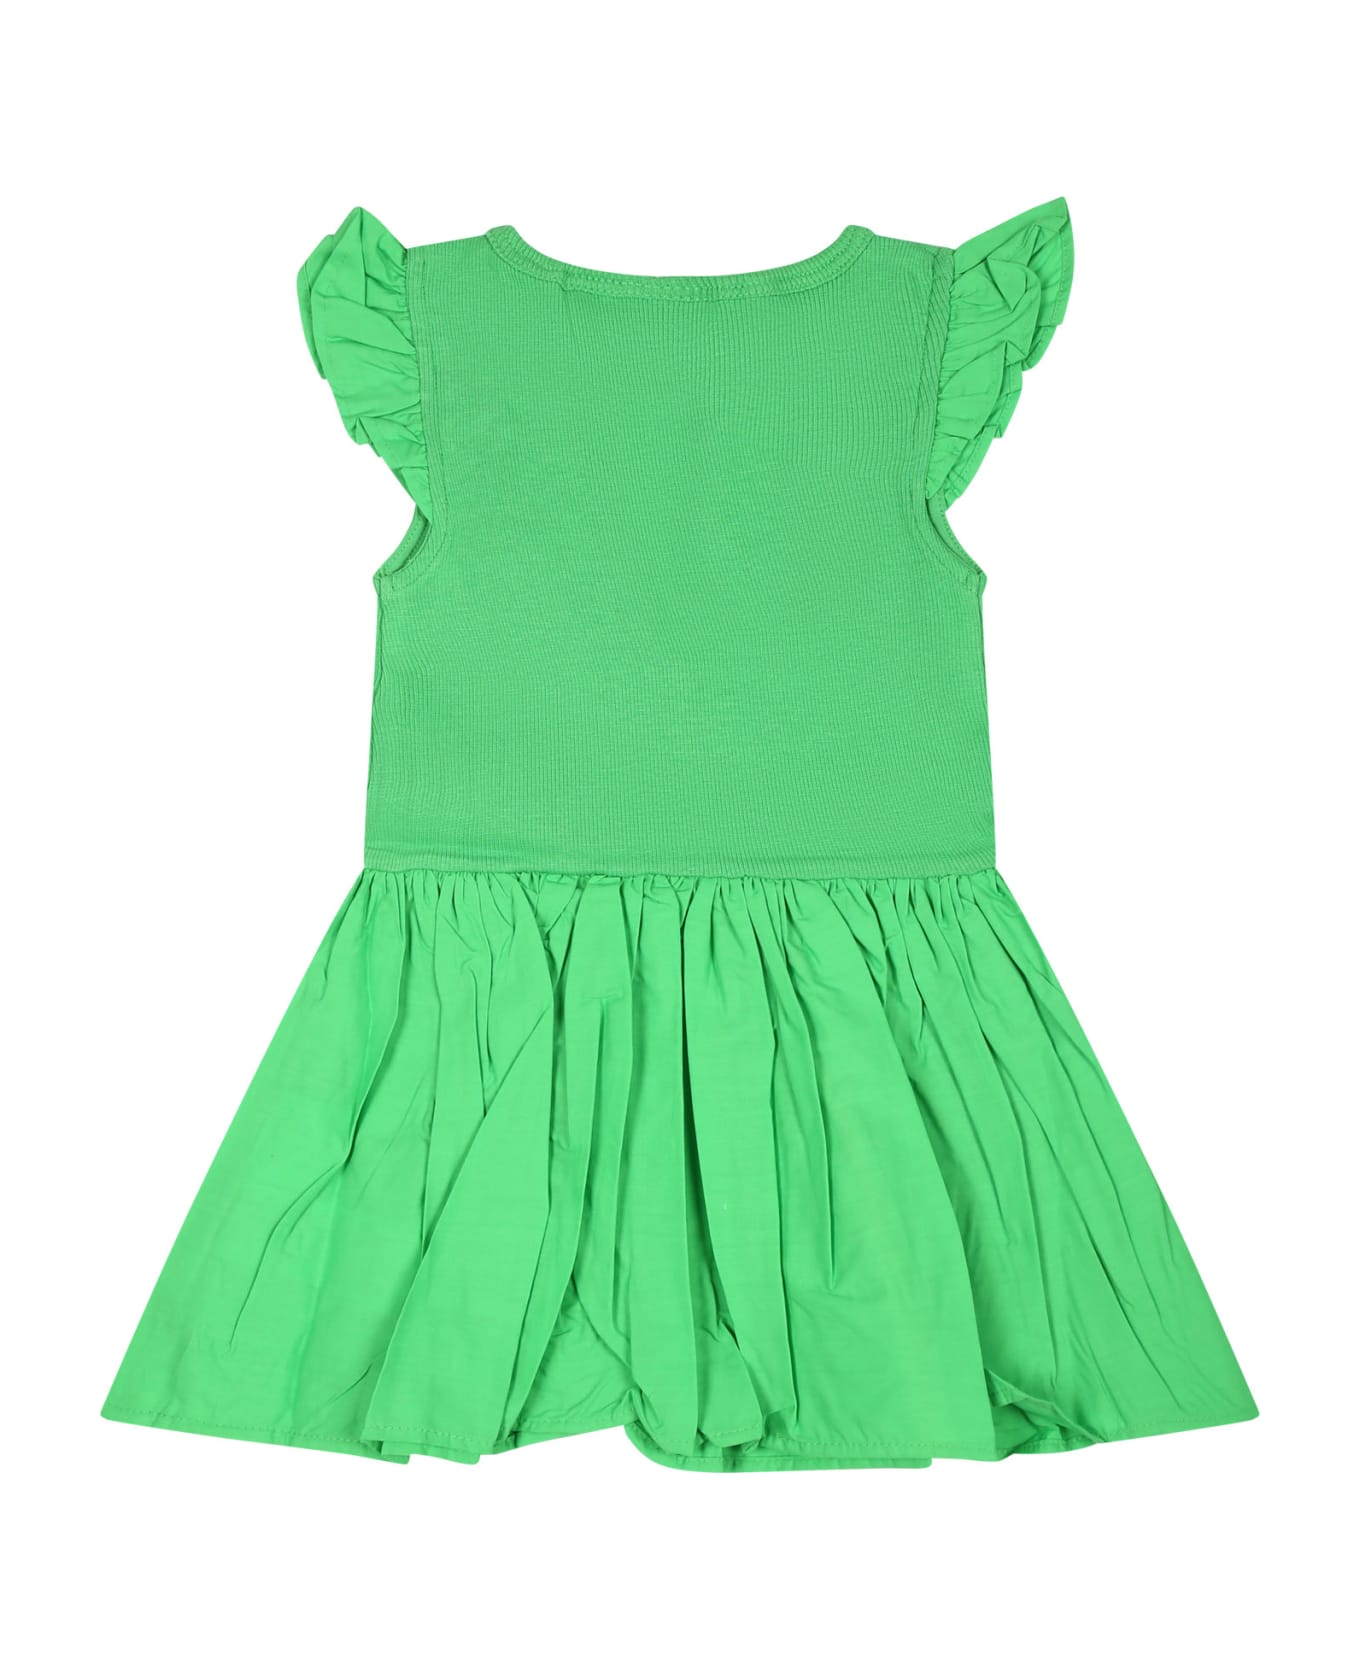 Molo Green Dress For Baby Girl - Green